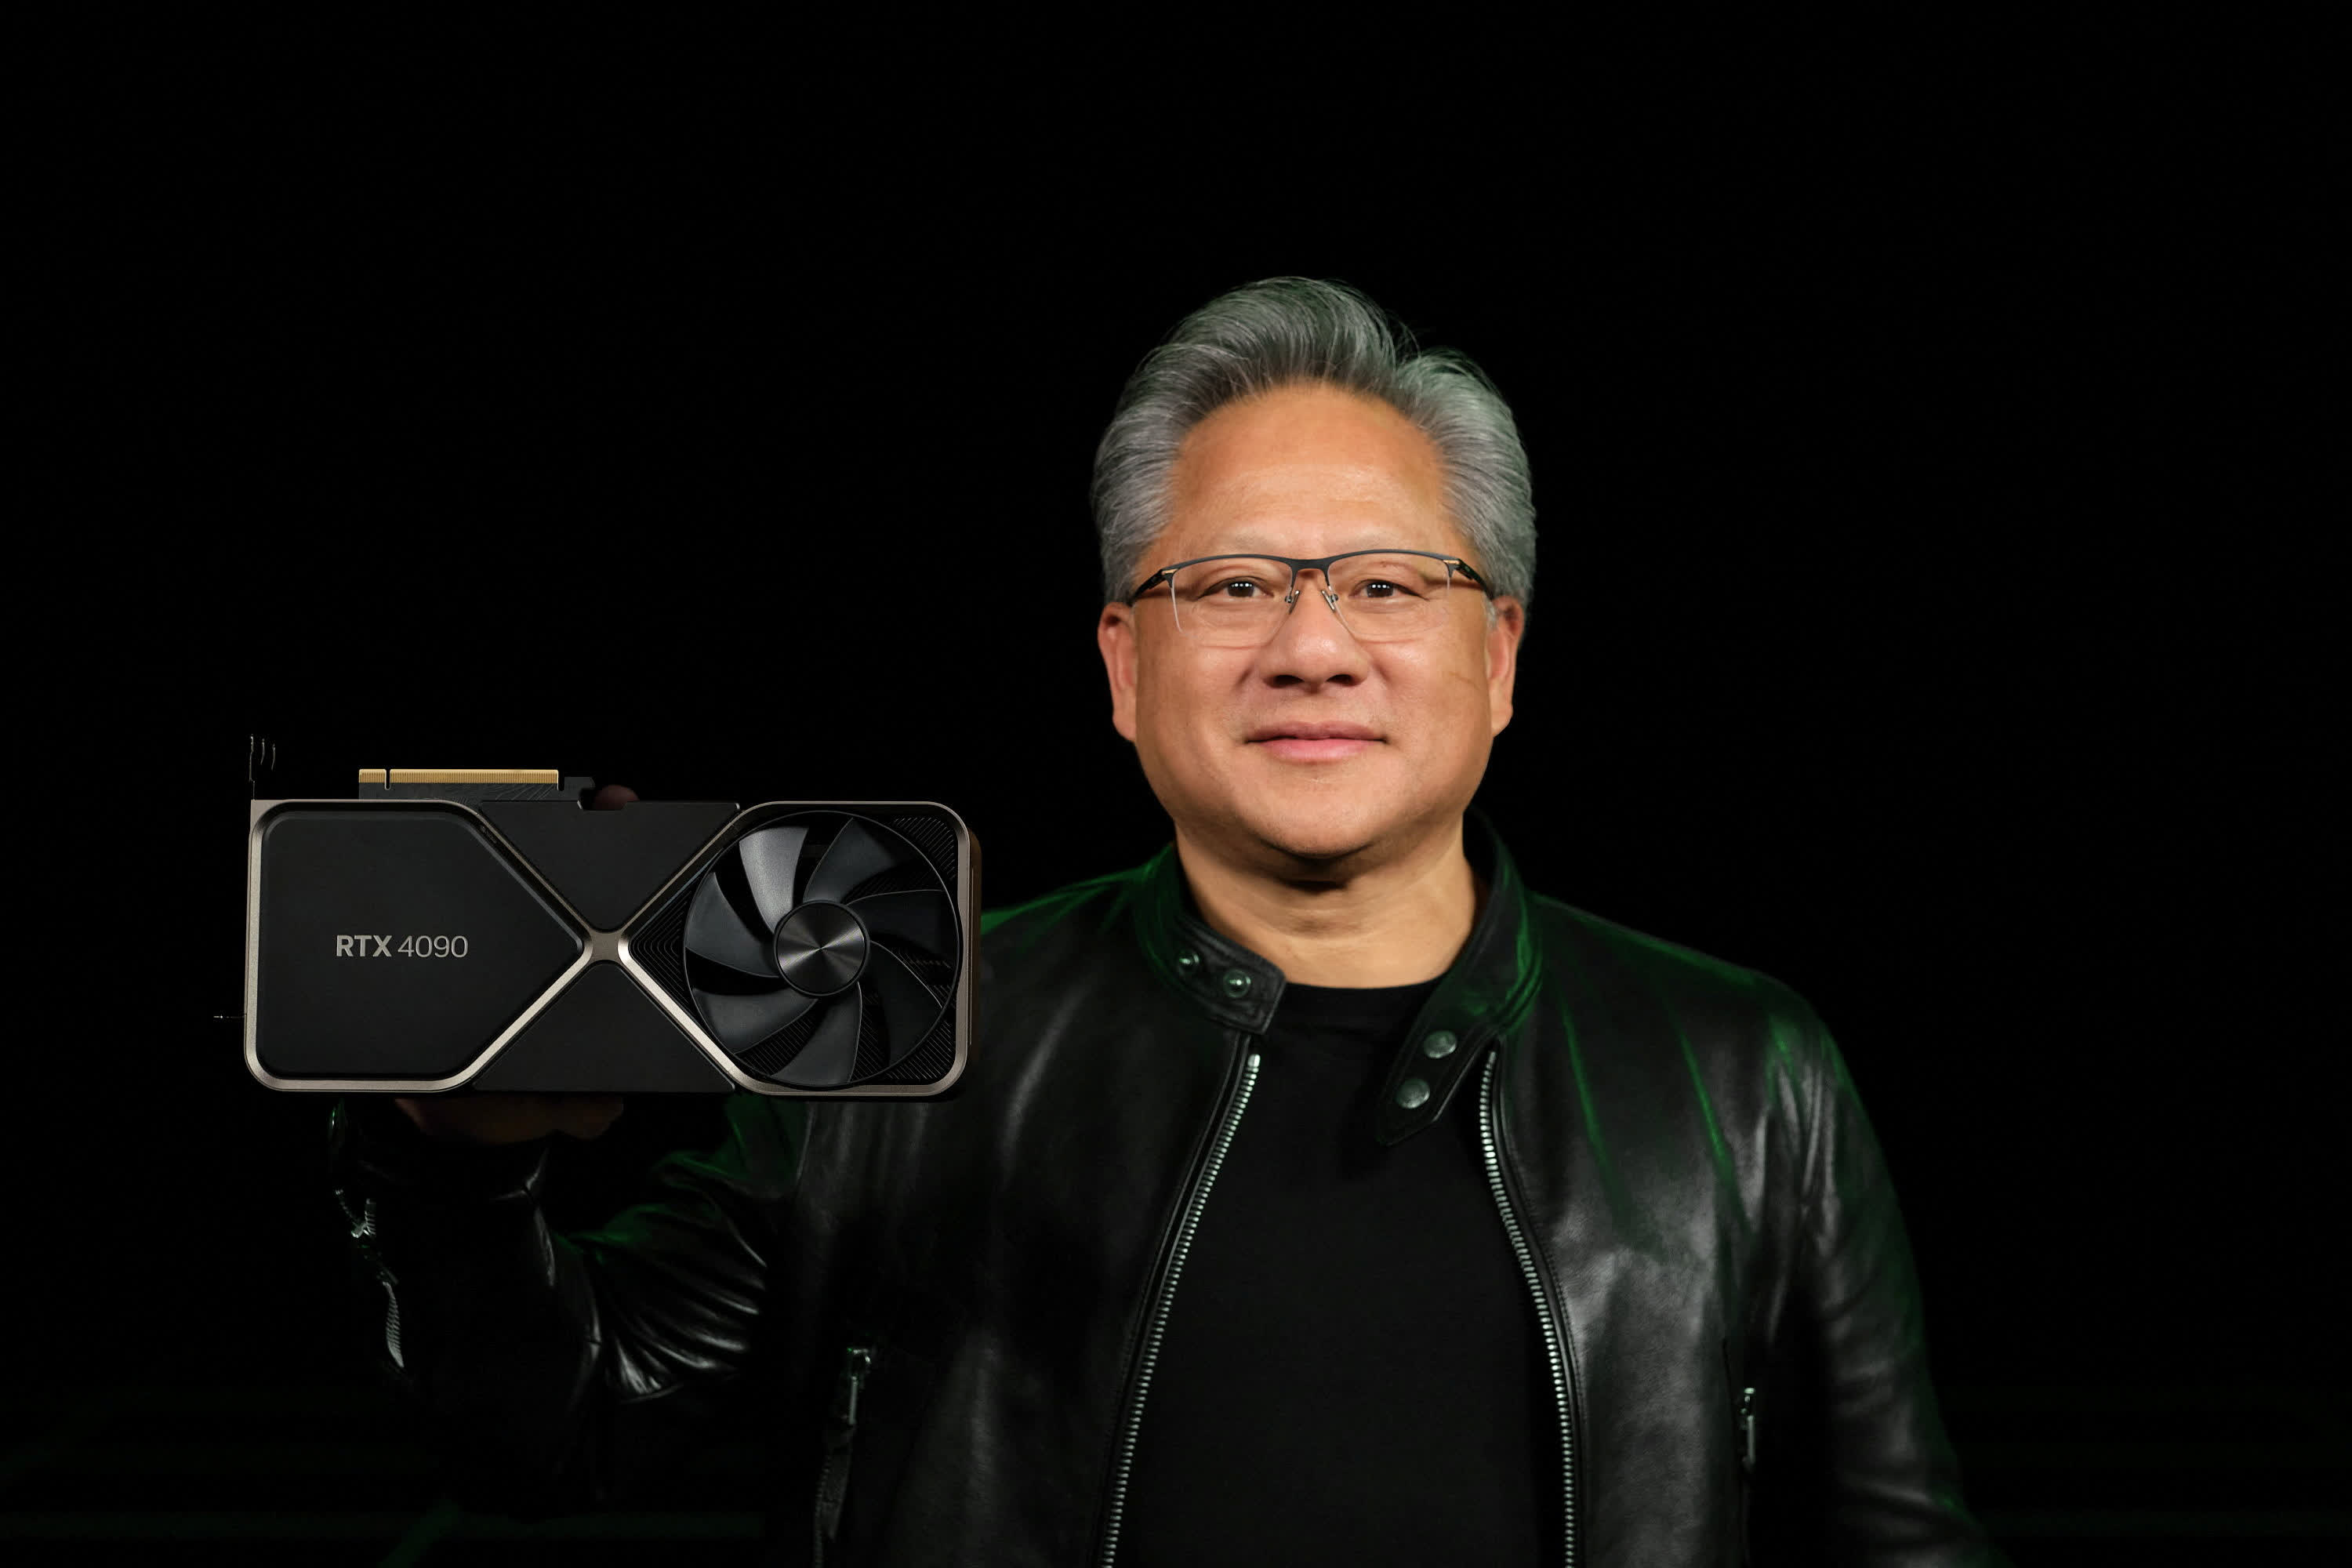 Nvidia's Jensen Huang once again claims Moore's Law is dead